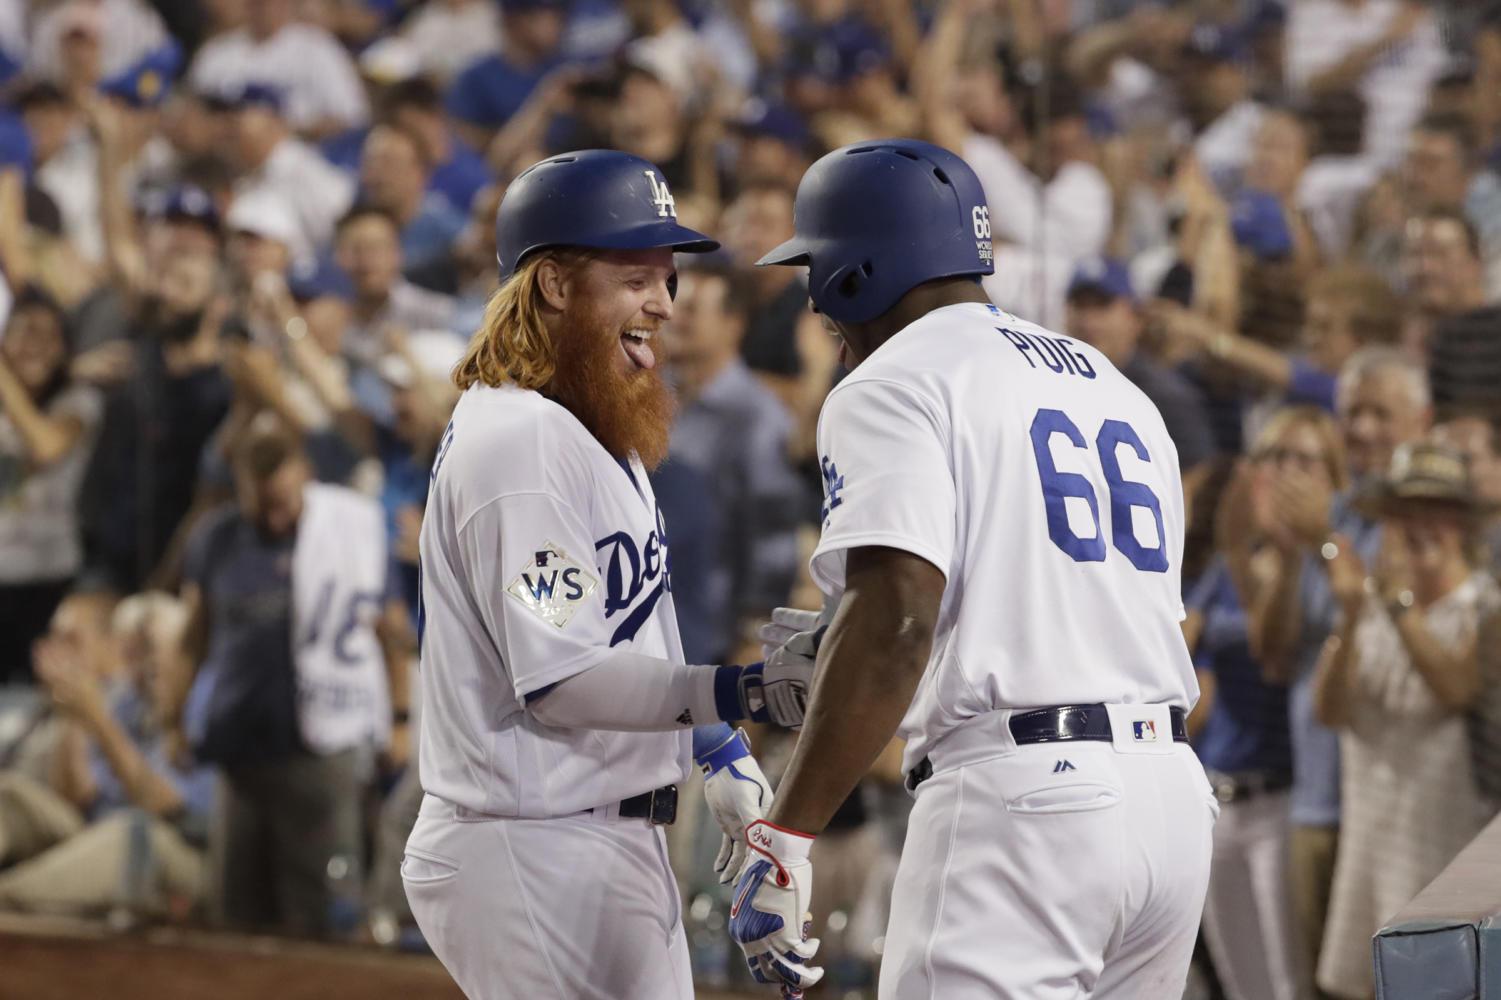 The Los Angeles Dodgers Justin Turner celebrates with Yasiel Puig after he hit a two-run homerun in Tuesday’s World Series opener at Dodger Stadium. Los Angeles defeated the Houston Astros, 3-1.